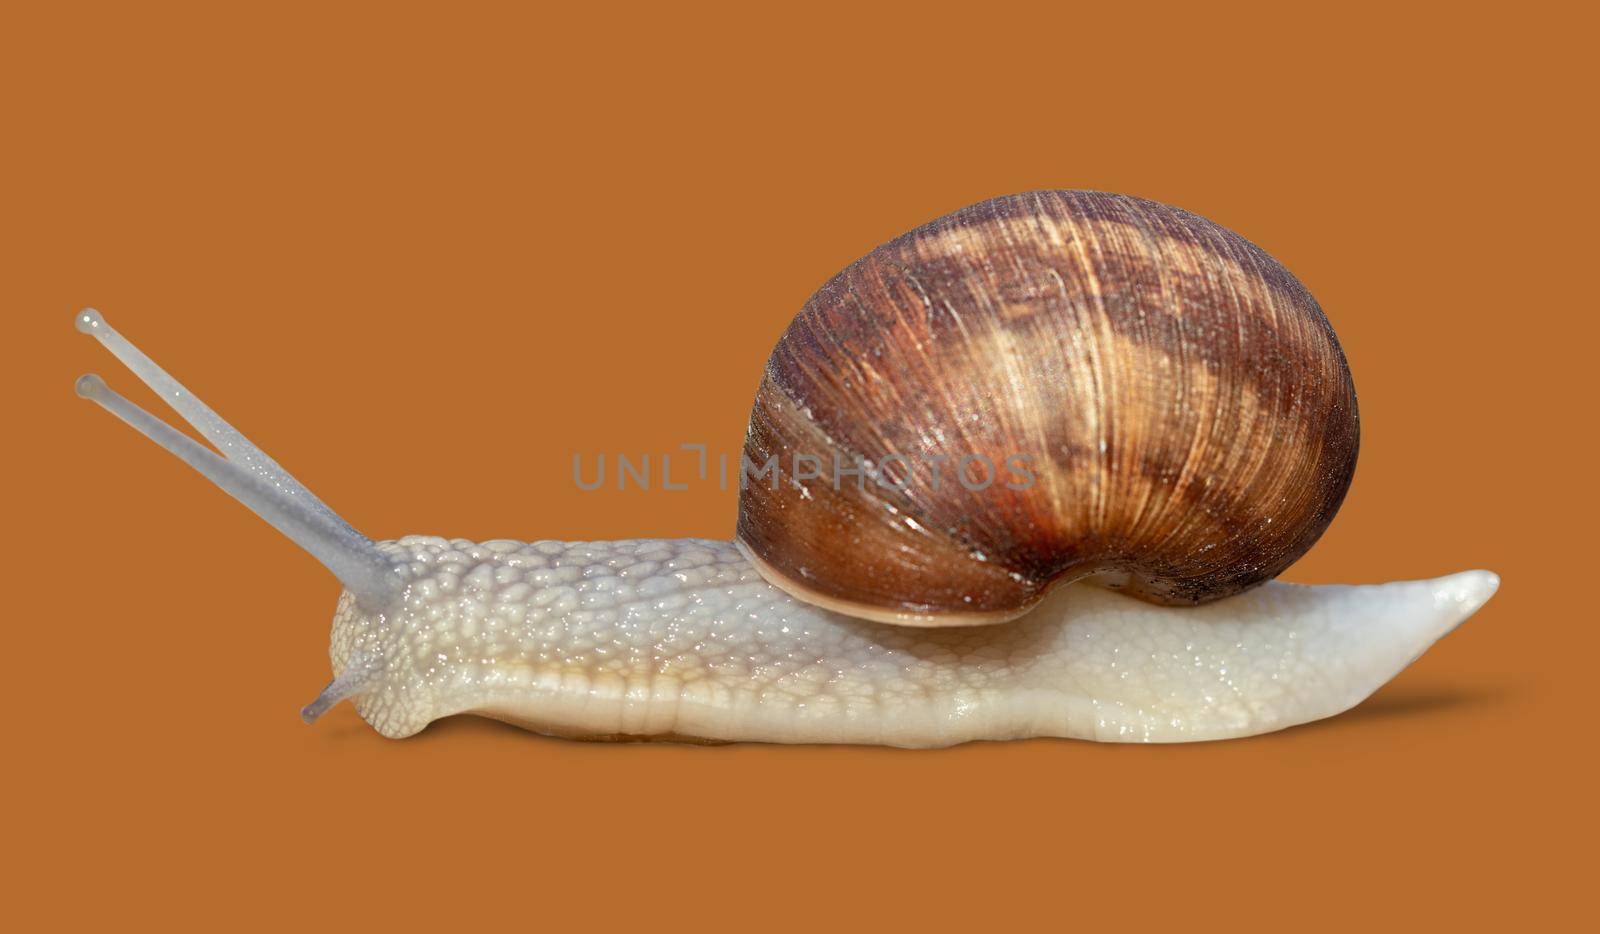 Grawling garden snail isolated on orange color background, close-up macro side view